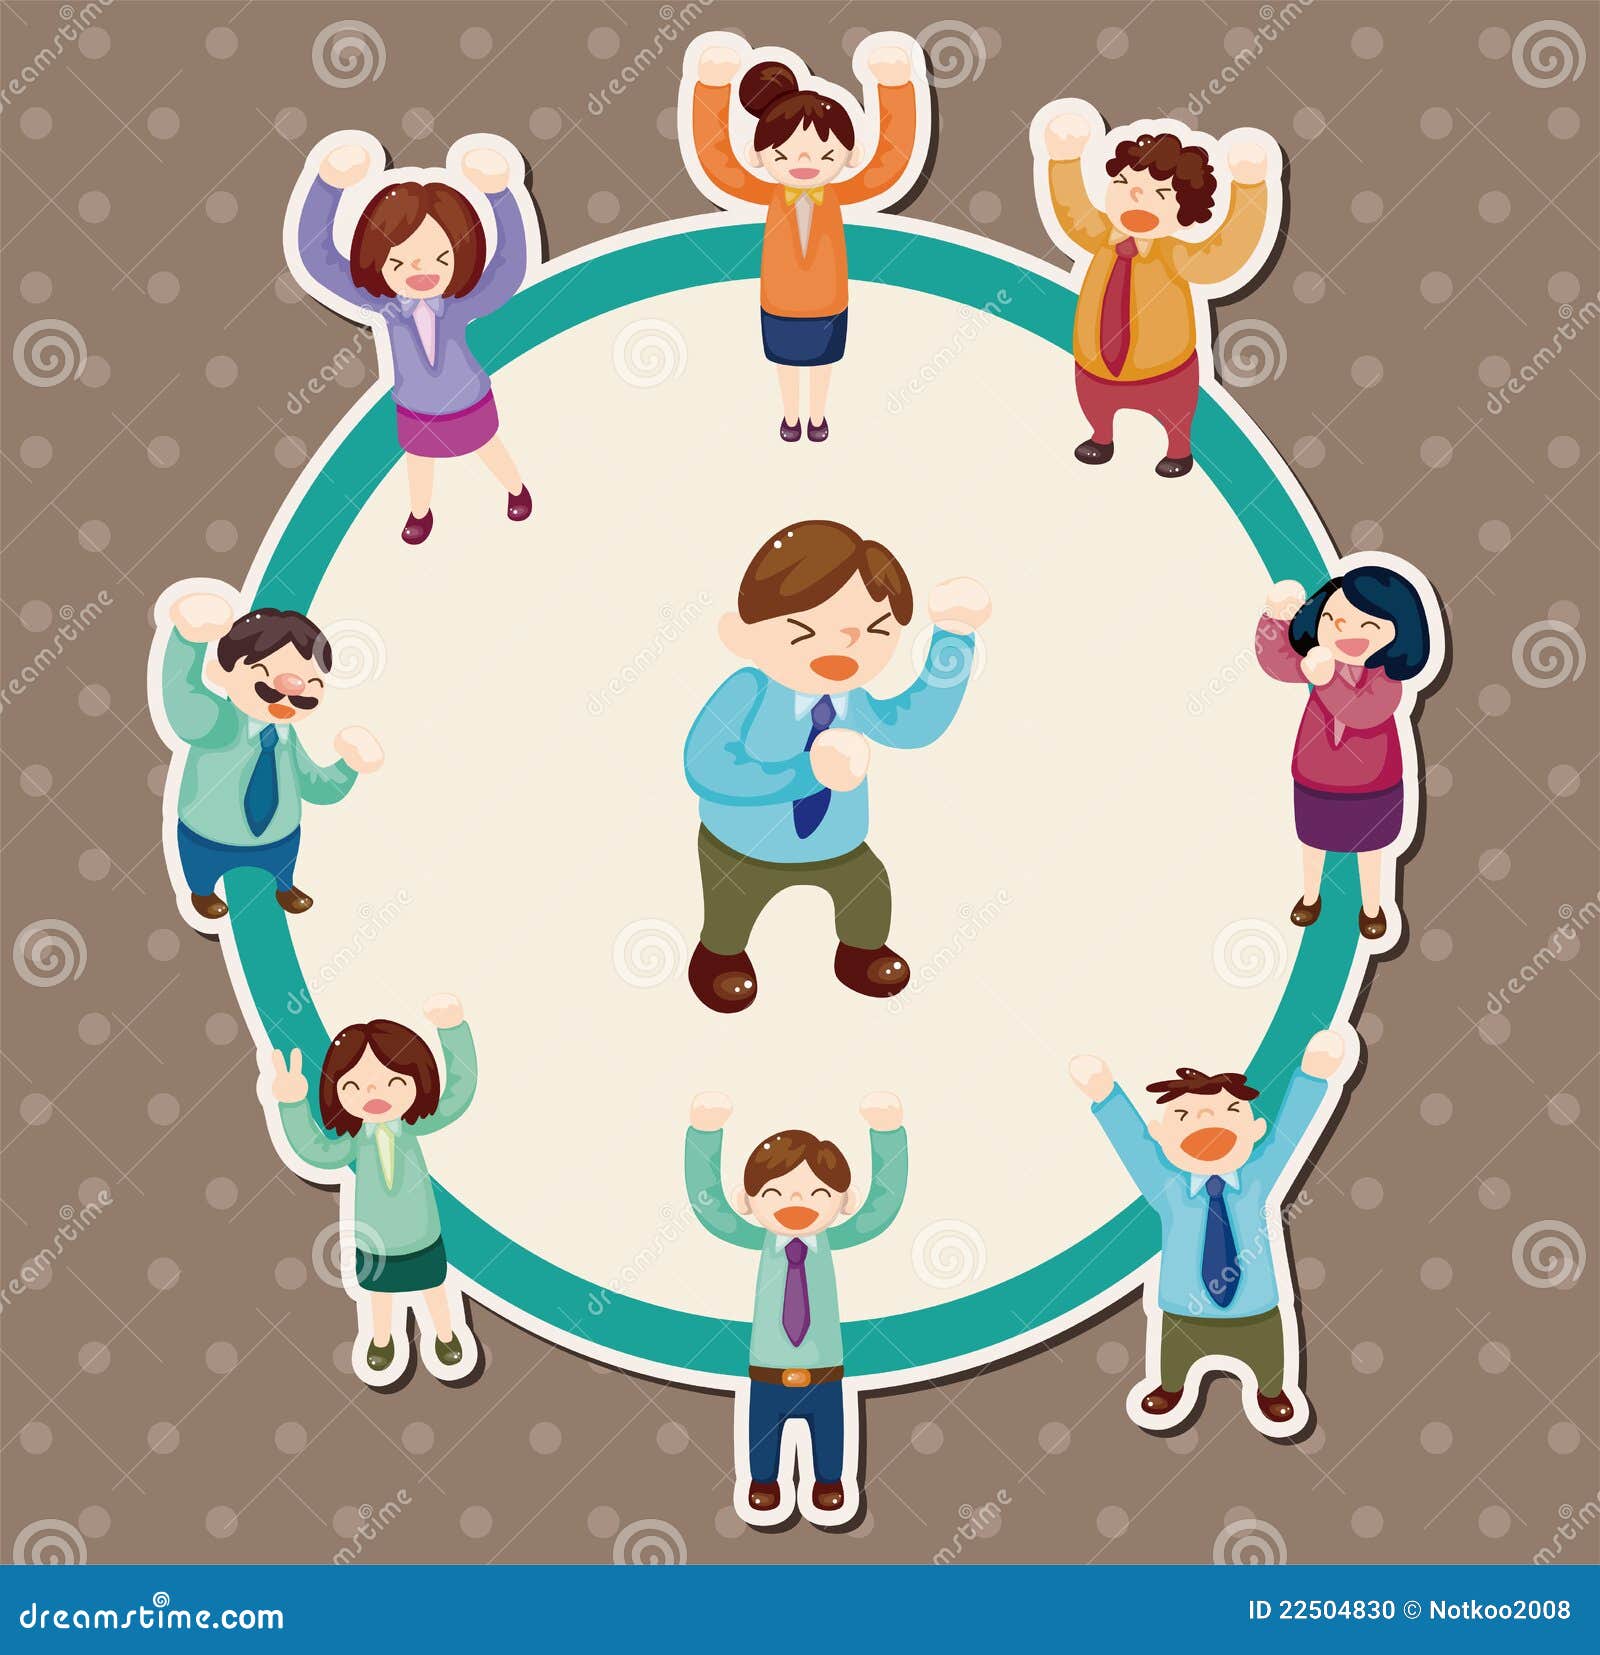 happy workplace clipart - photo #45